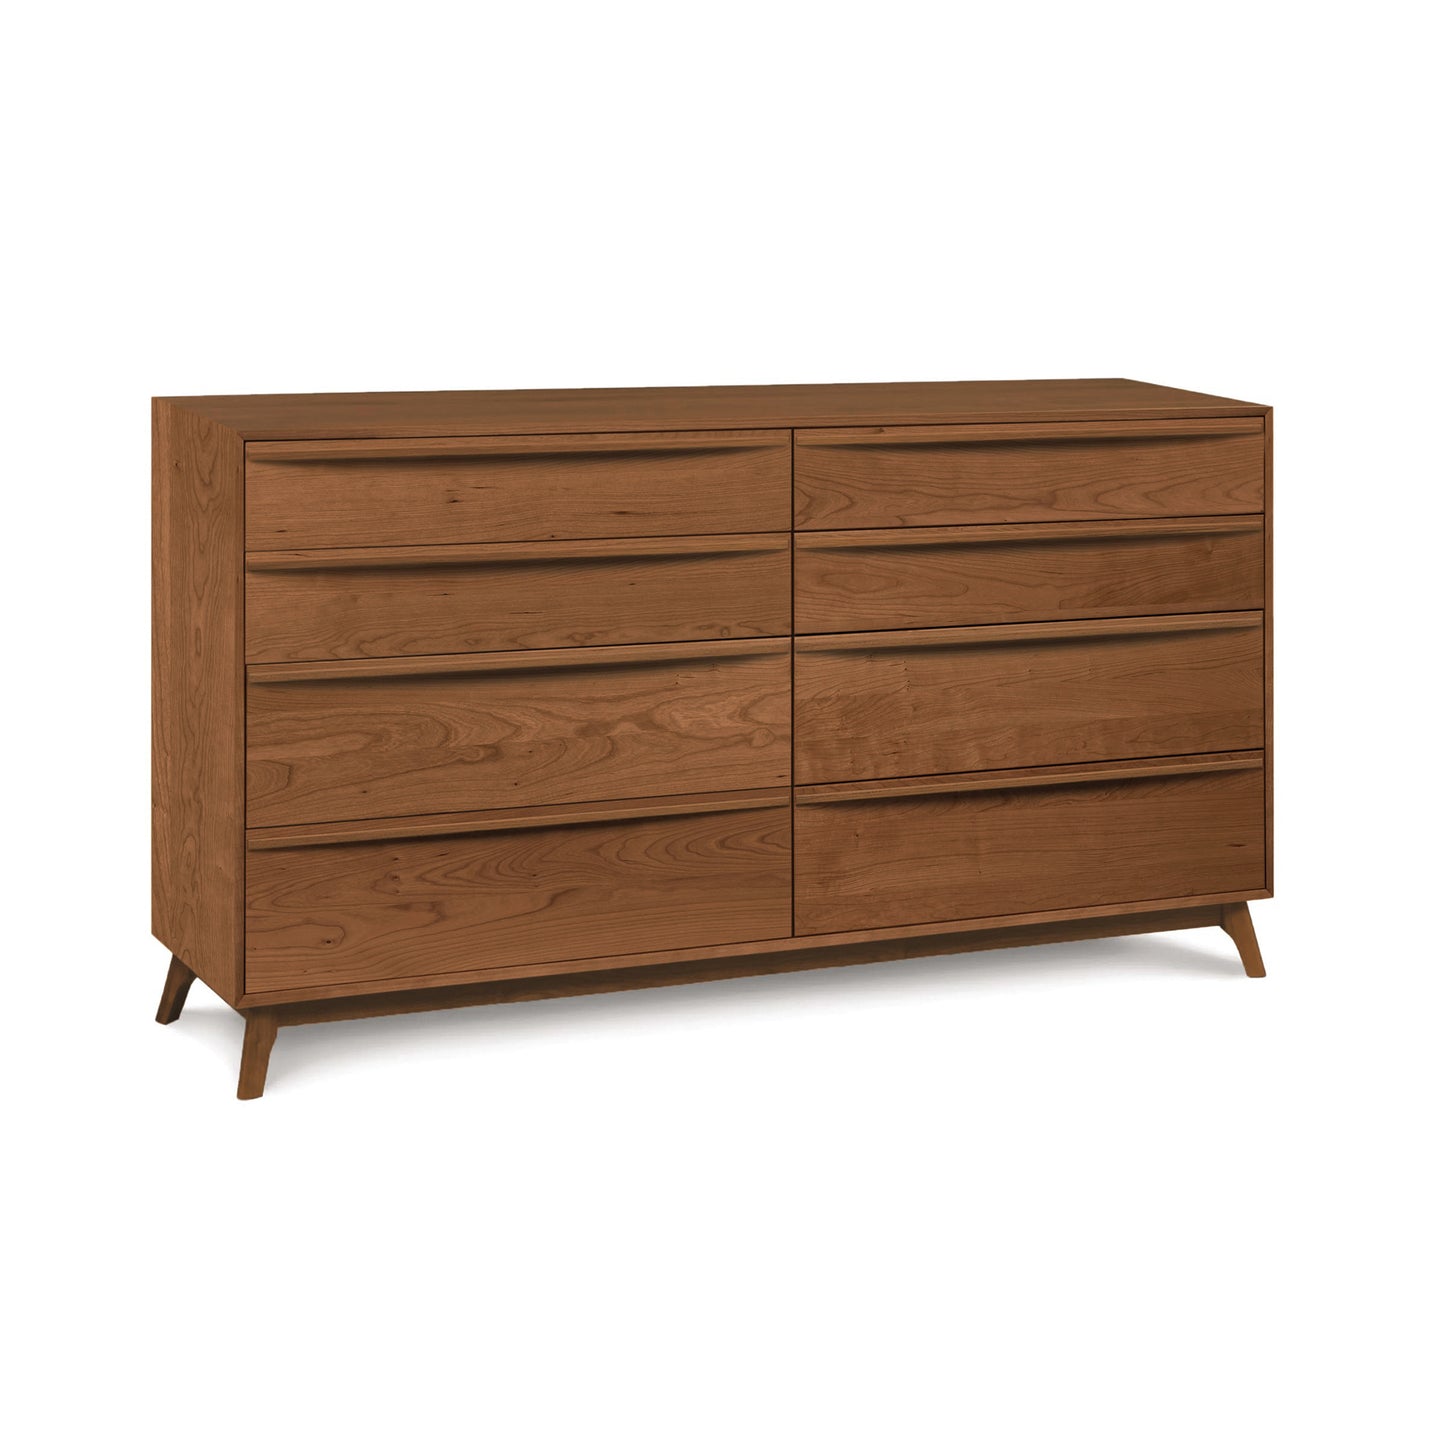 A mid-century modern eight-drawer dresser with angled legs and horizontal drawer pulls on a white background, part of the Copeland Furniture Catalina furniture collection.